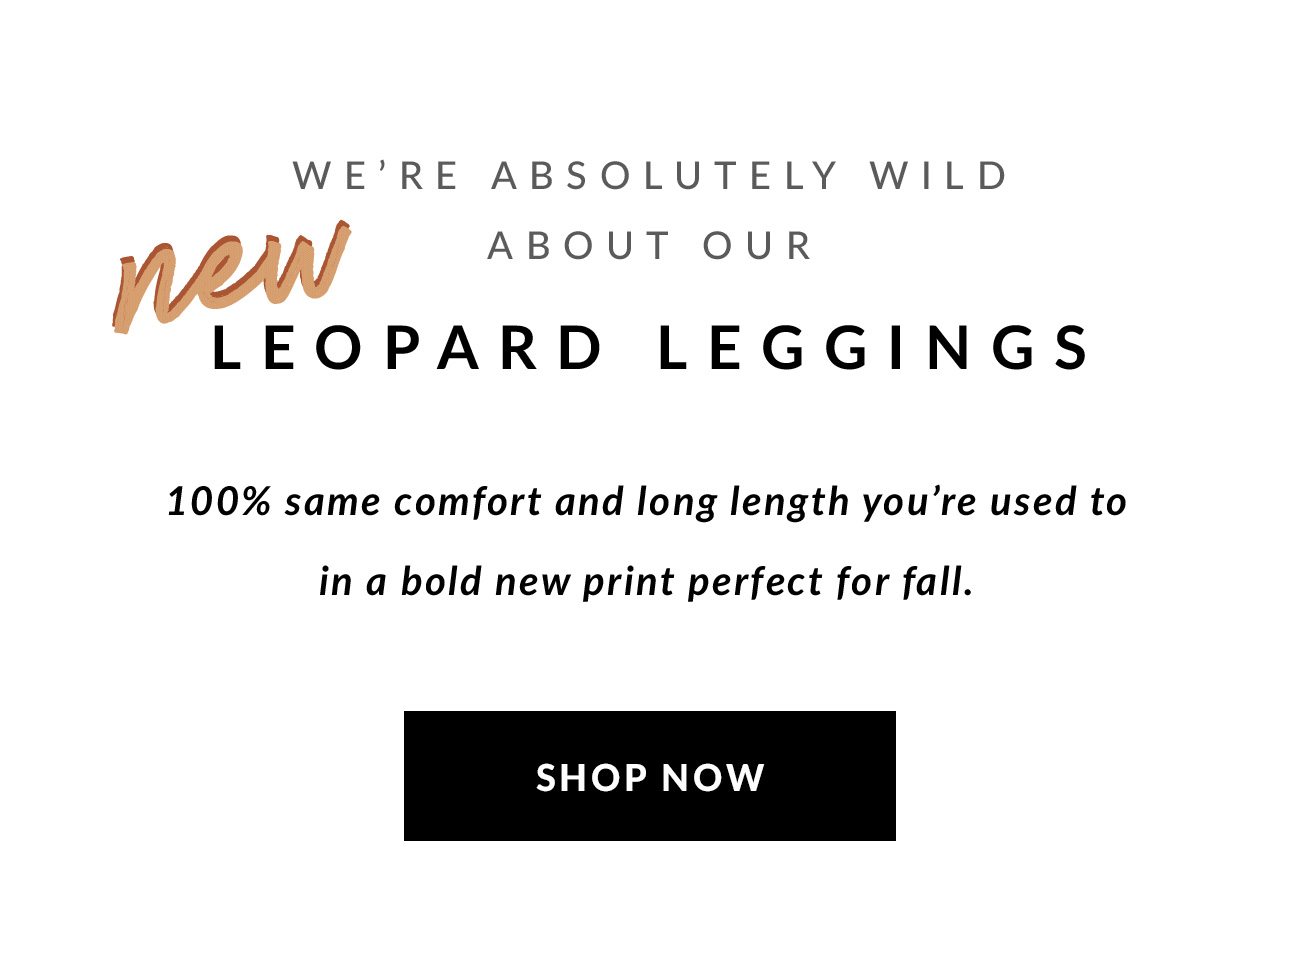 We're Absolutely Wild About Our New Leopard Leggings - Shop Now